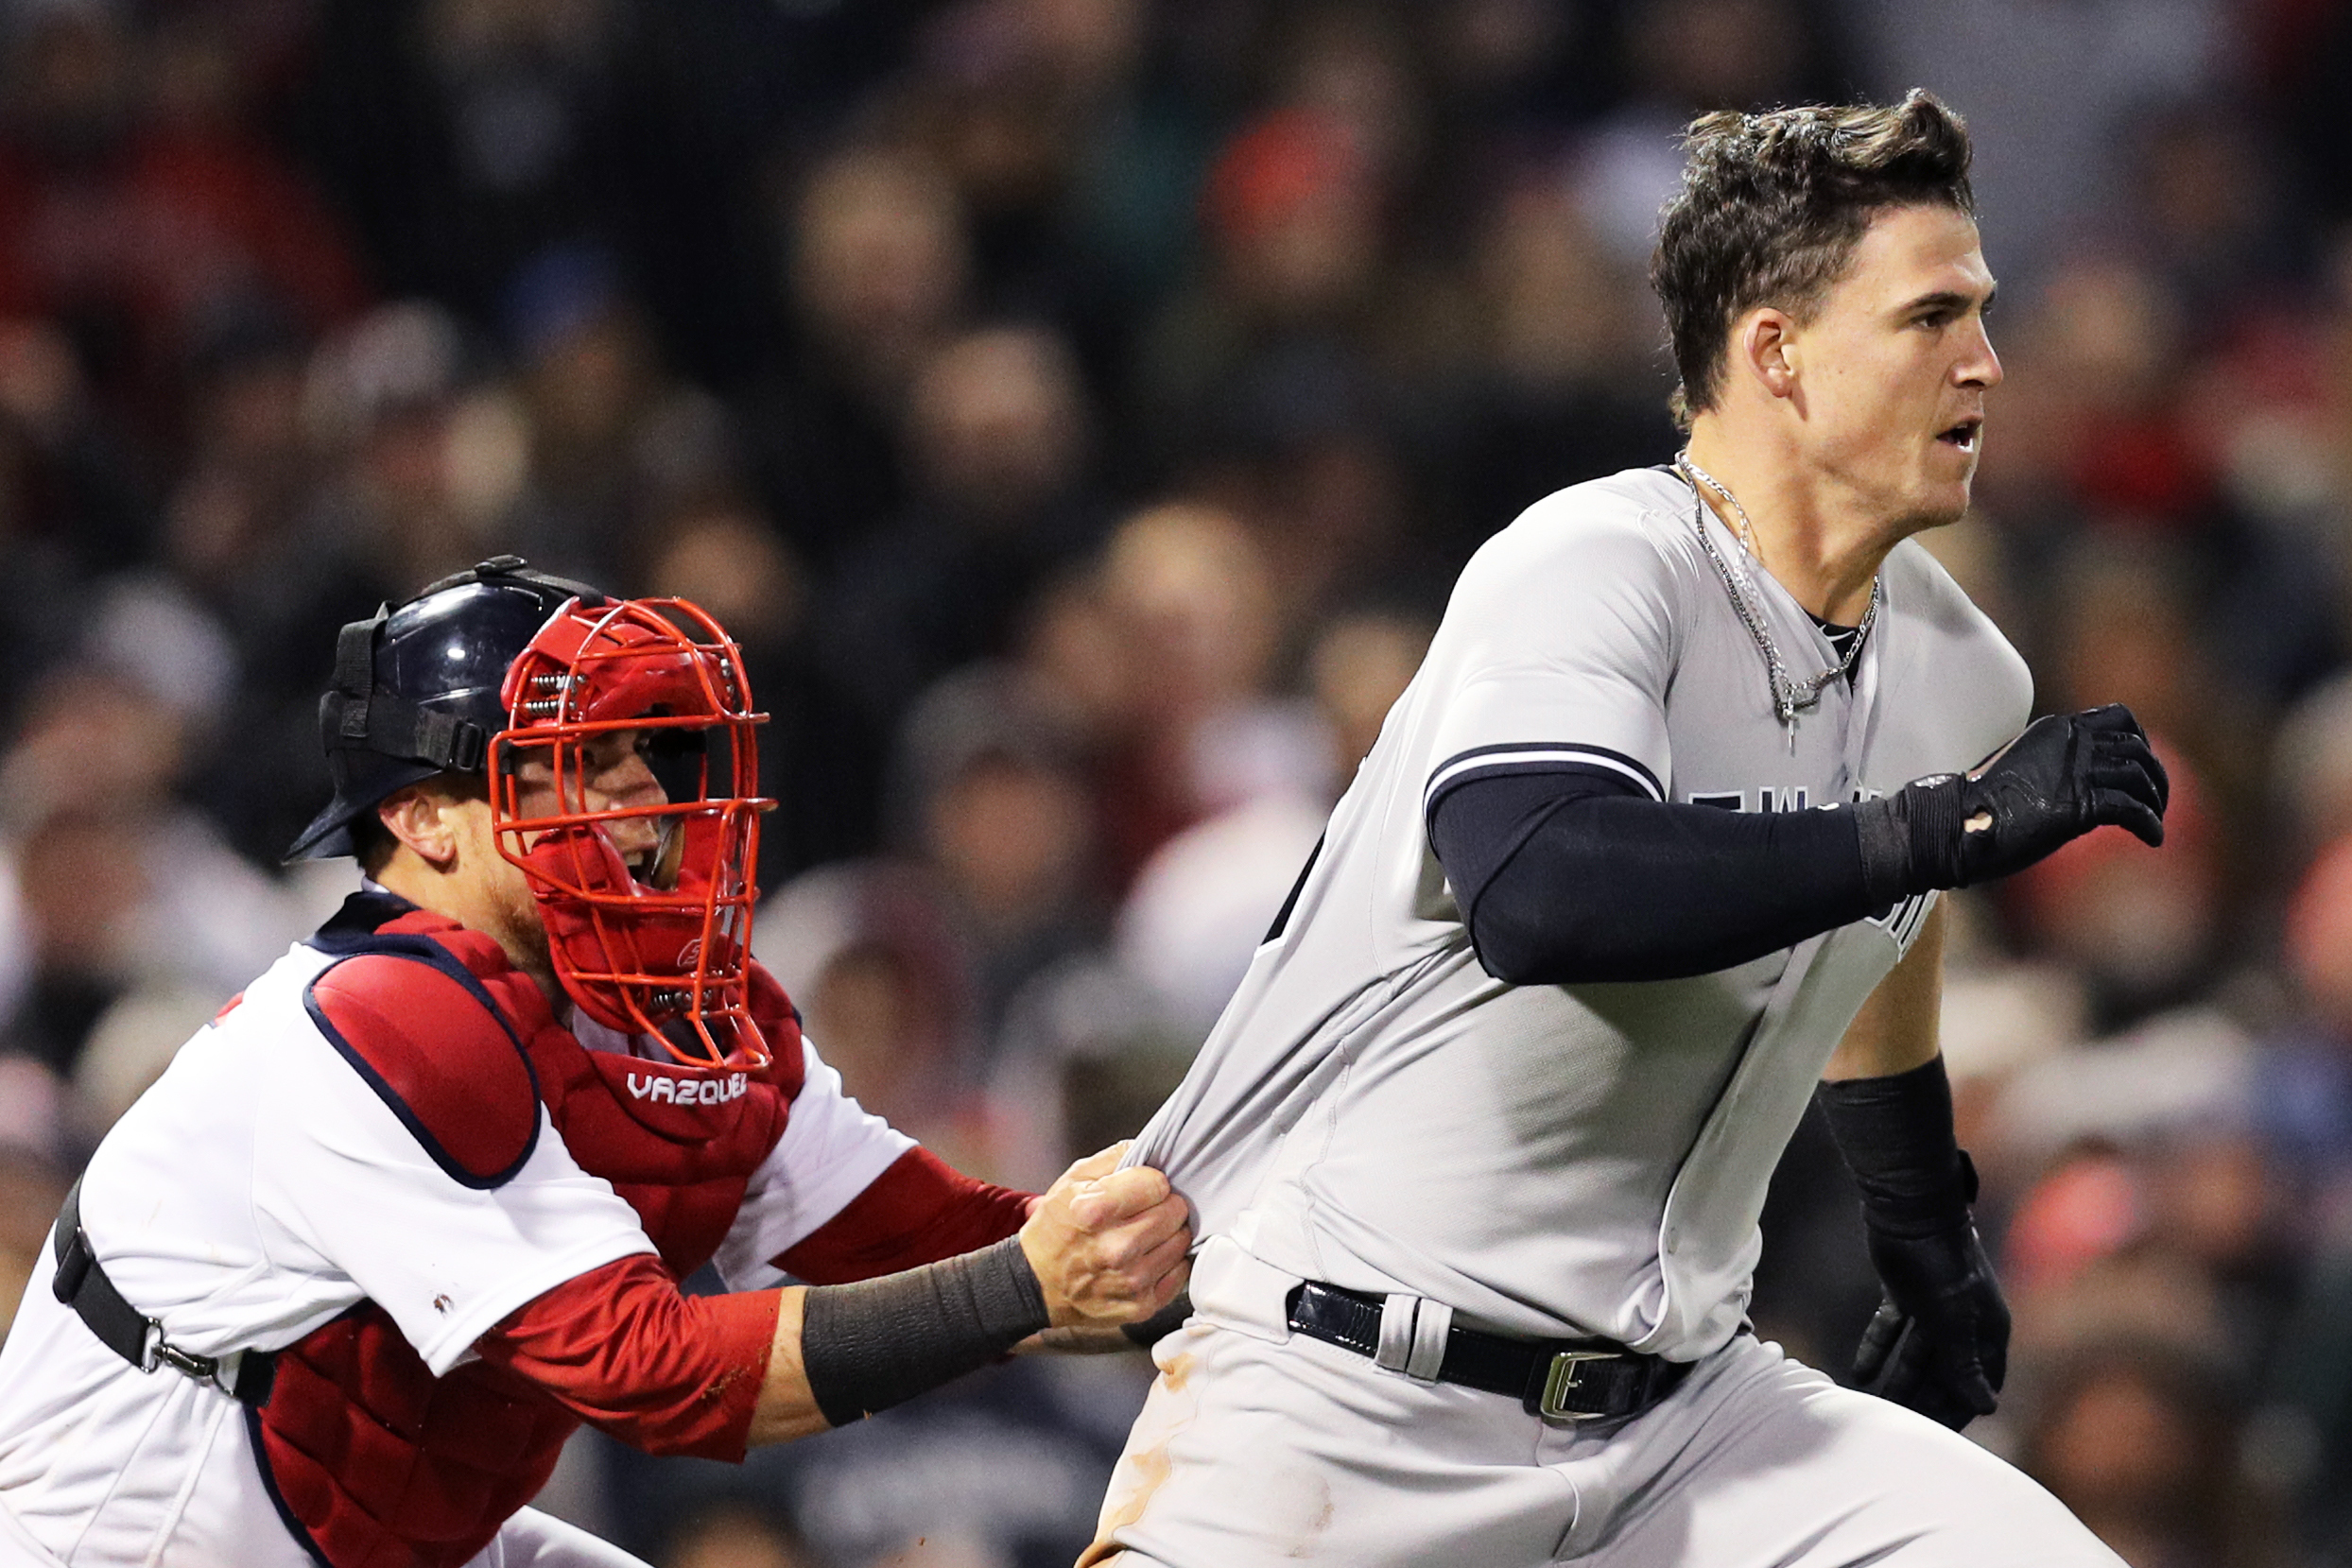 New York Yankees, Boston Red Sox Reignite Rivalry With Brawl